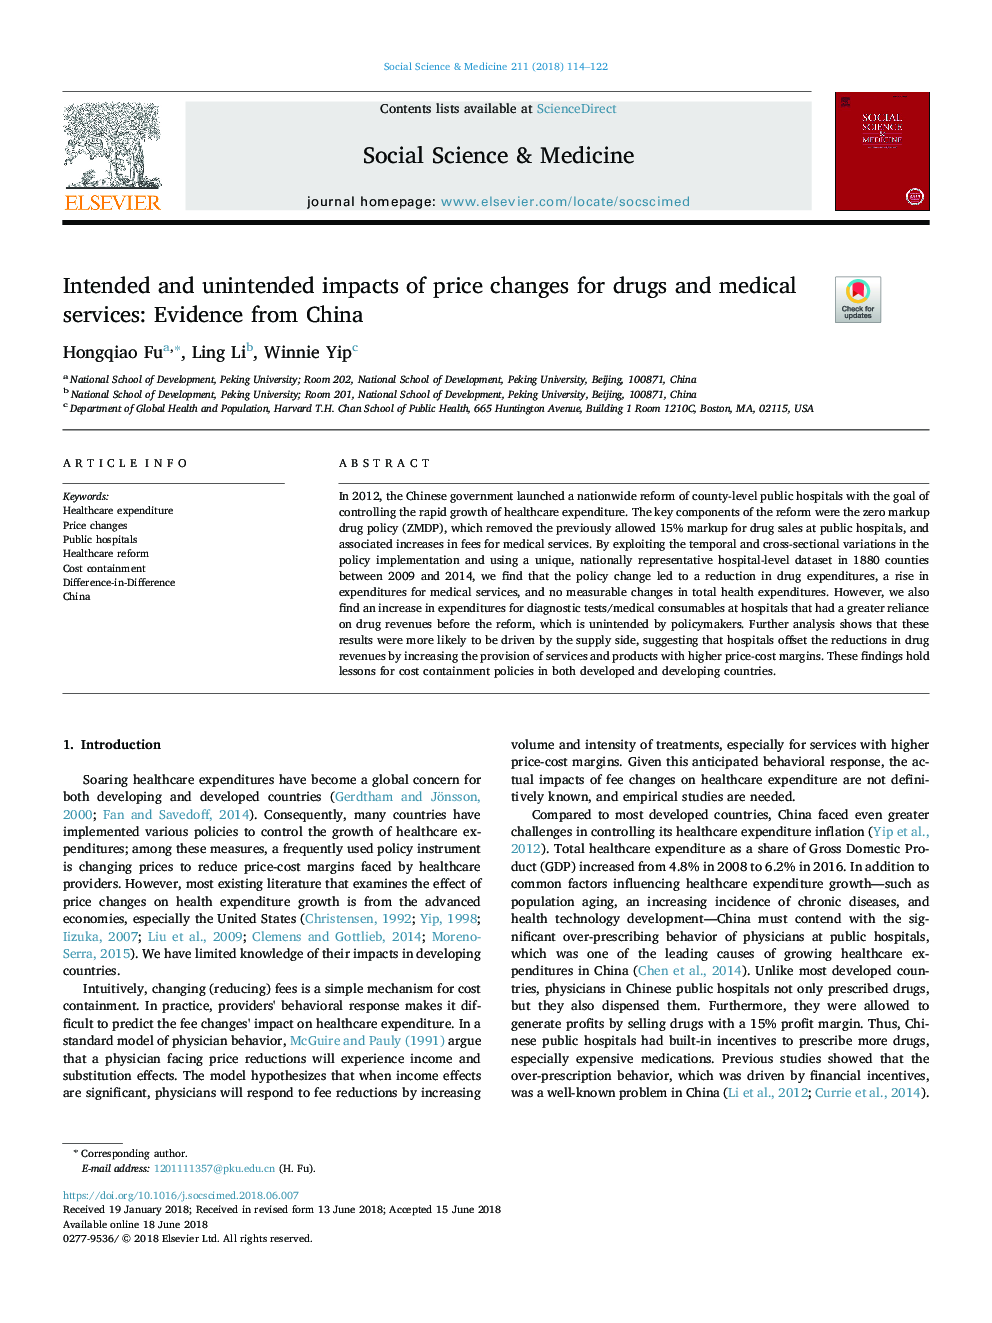 Intended and unintended impacts of price changes for drugs and medical services: Evidence from China